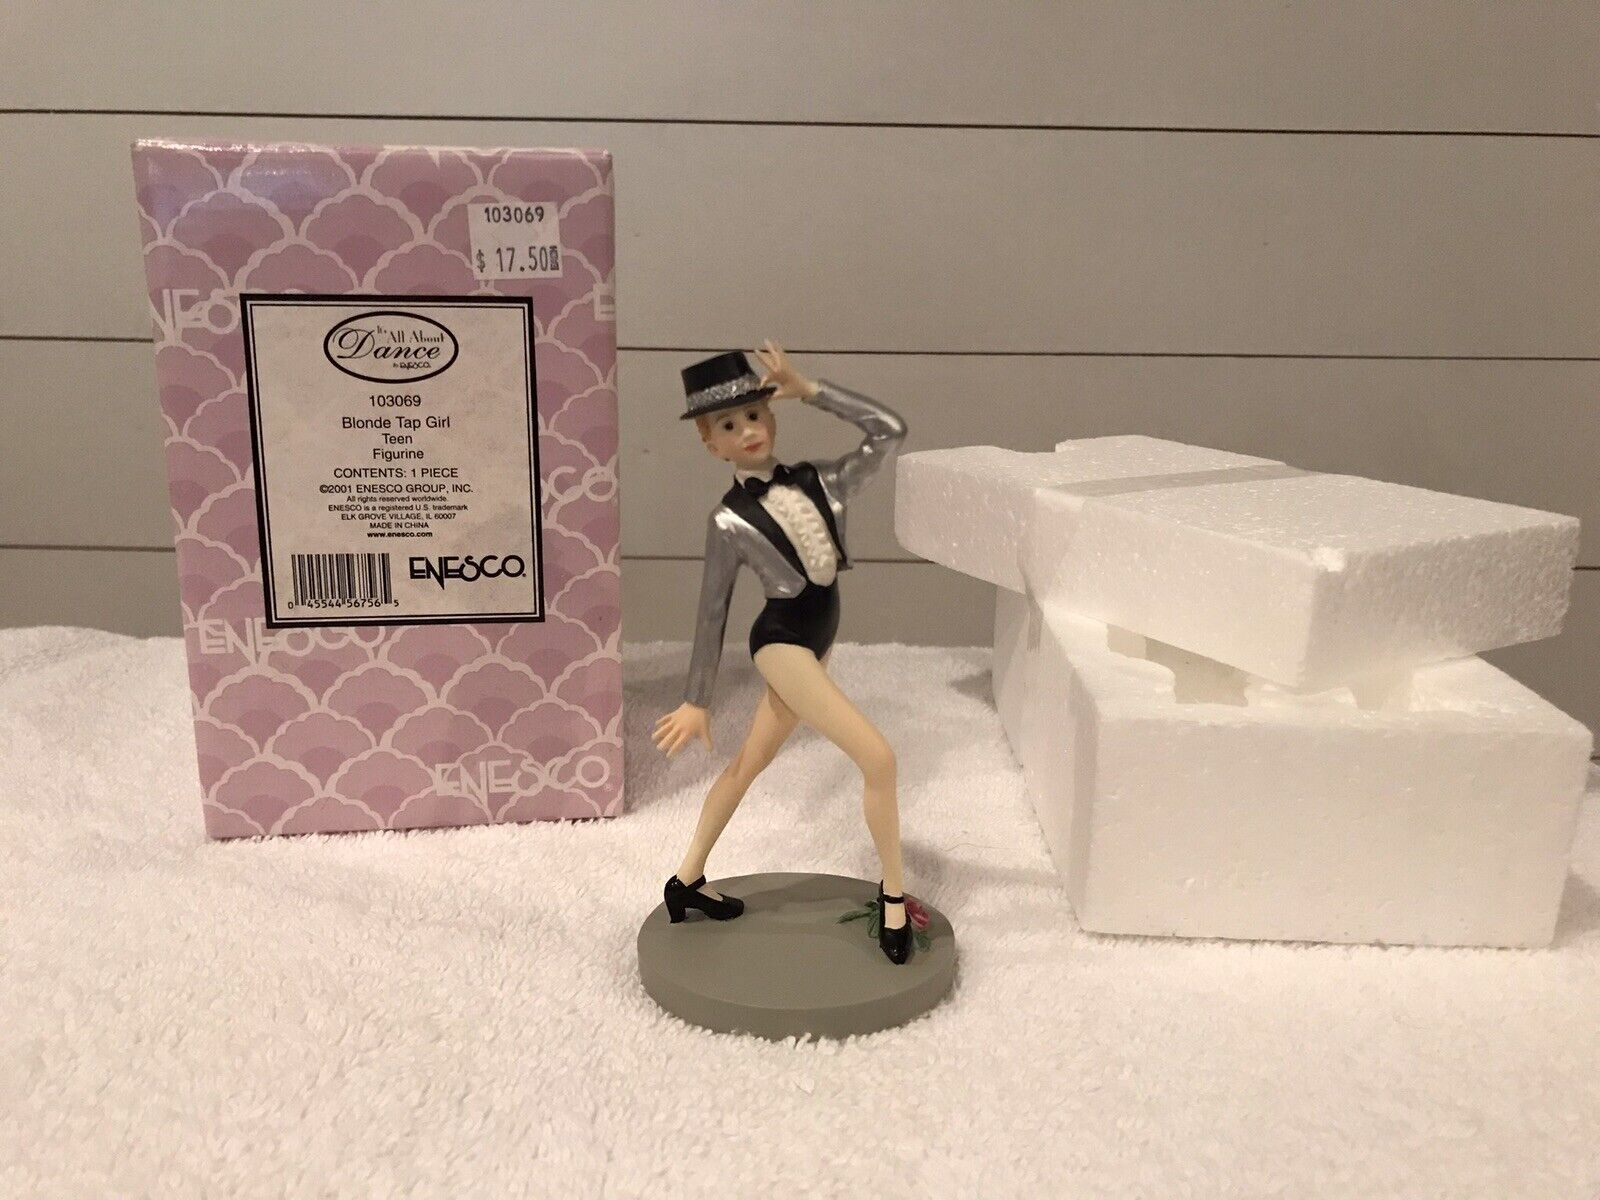 Enesco It’s All About Dance Blonde Tap Girl Teen 2001 New